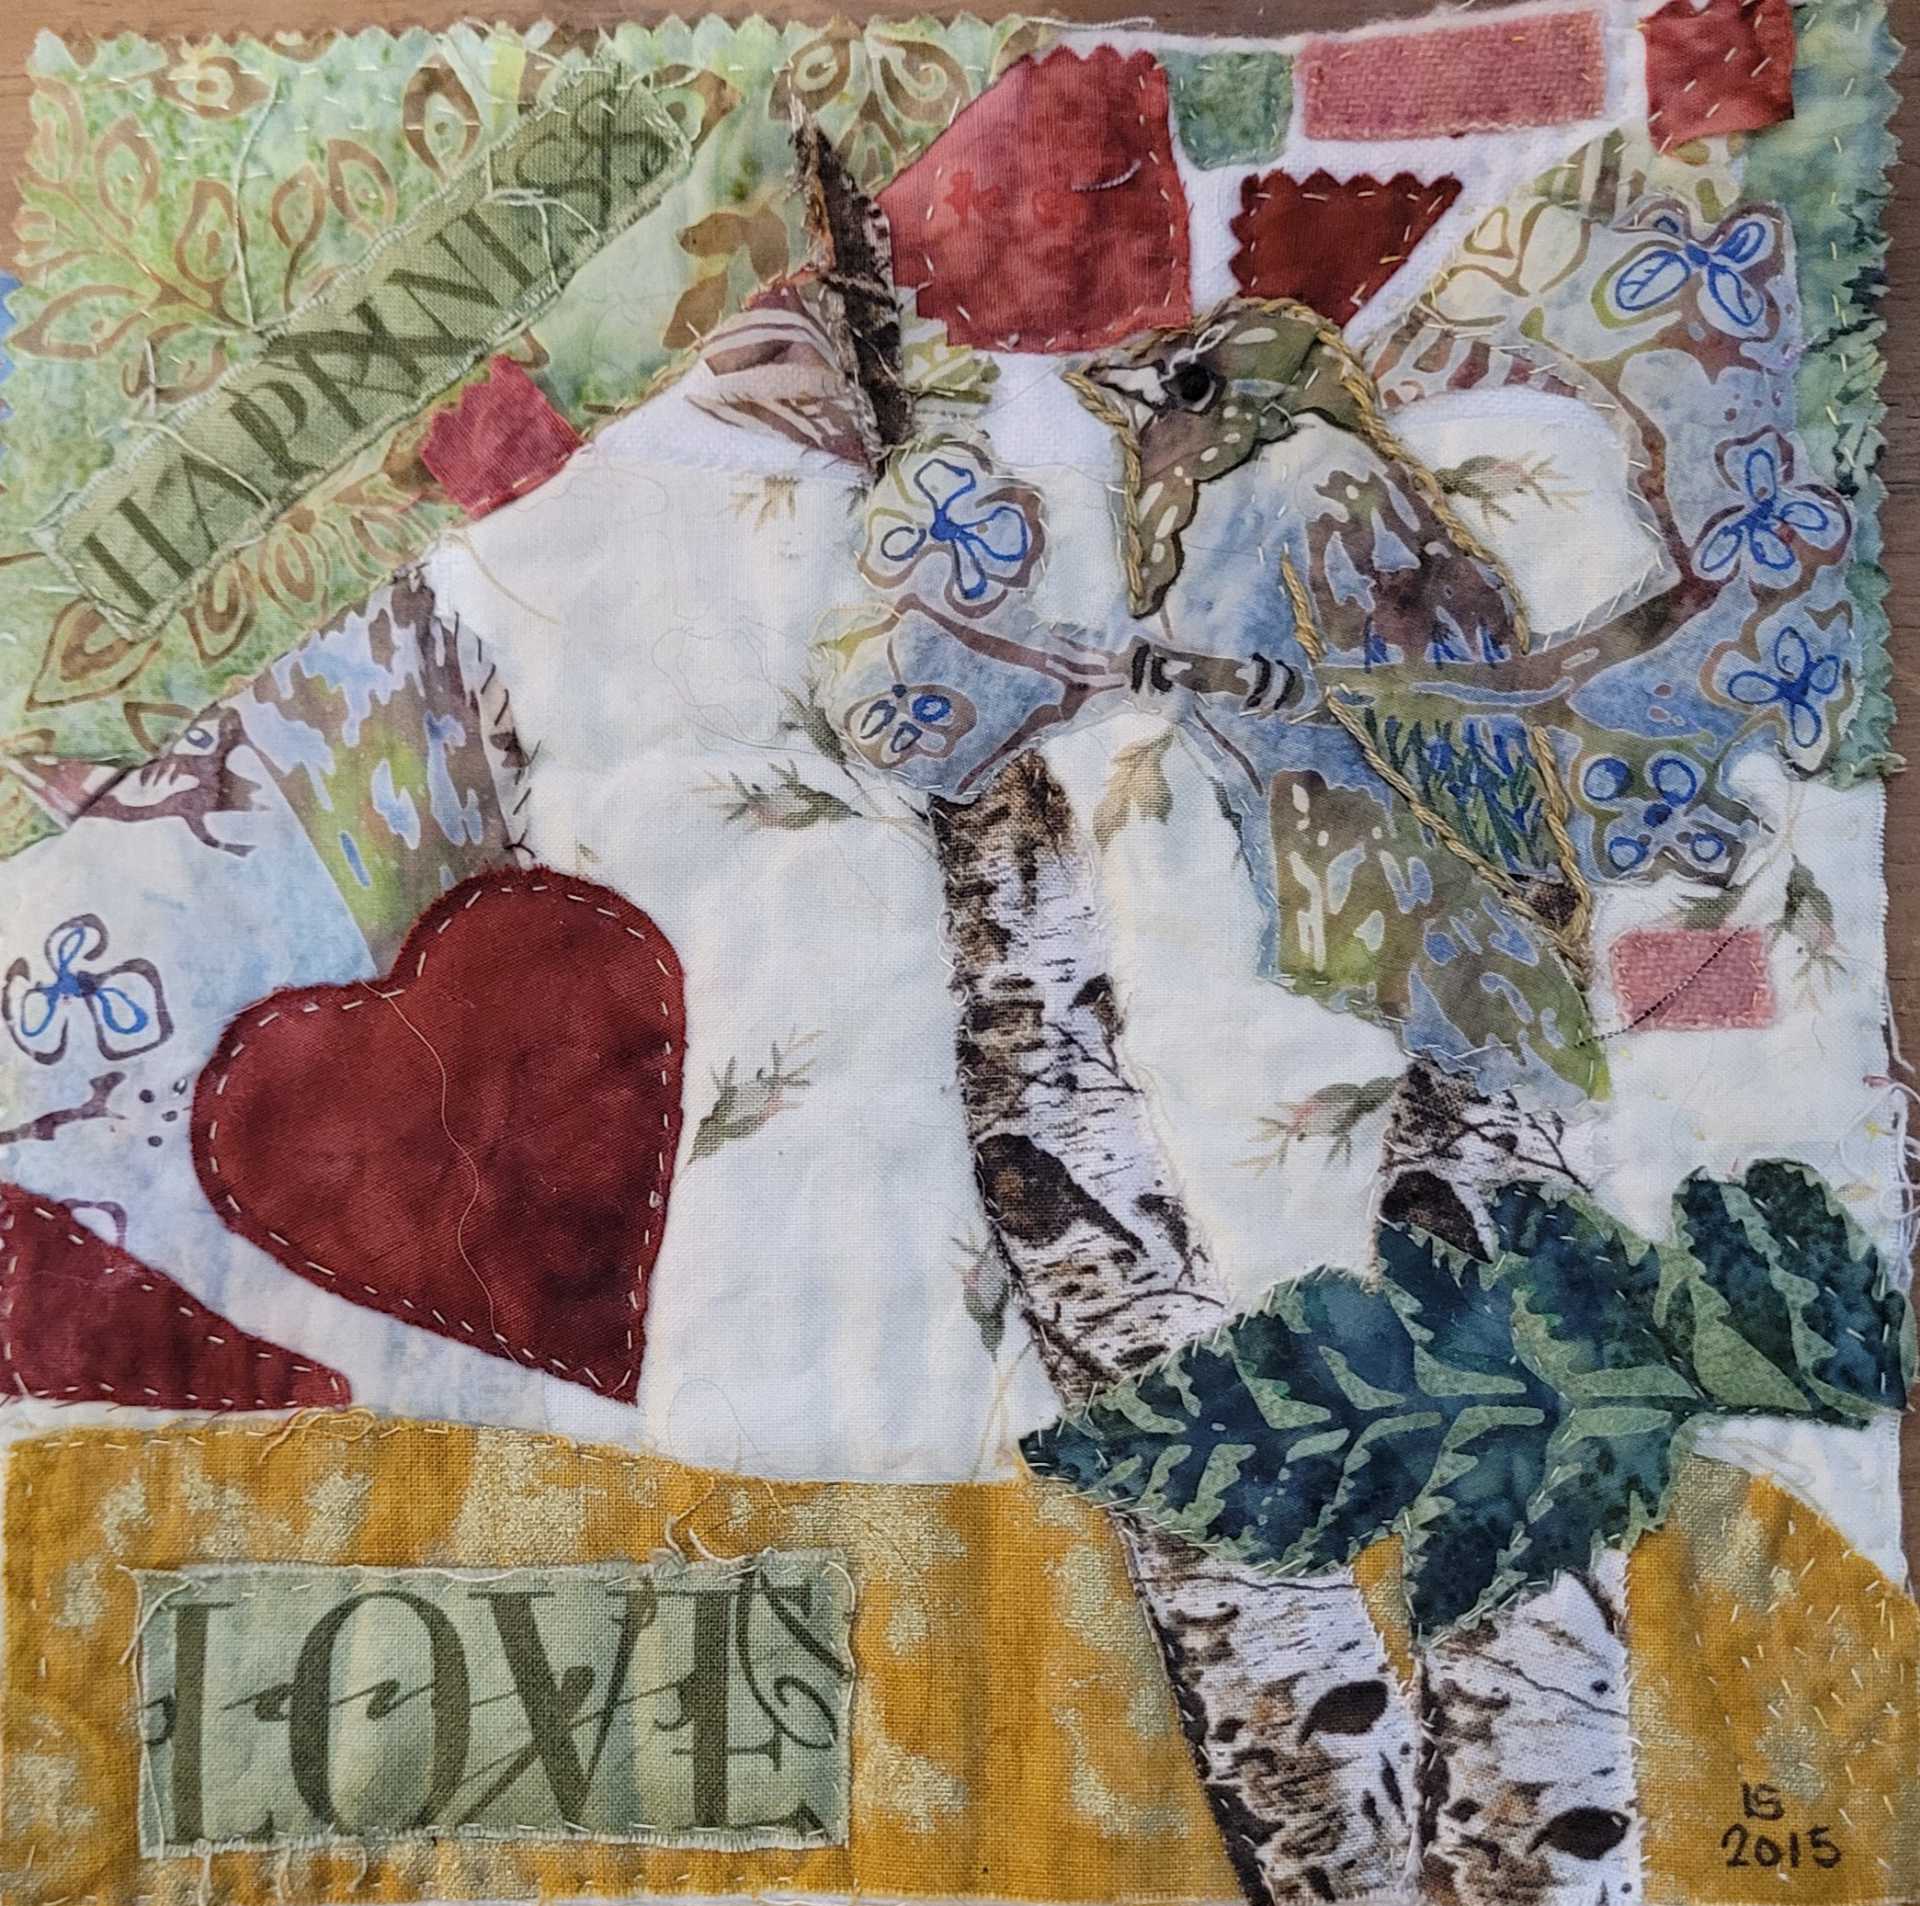 A homemade patchwork quilt with "Love" and "Happiness" embedded in the pattern.